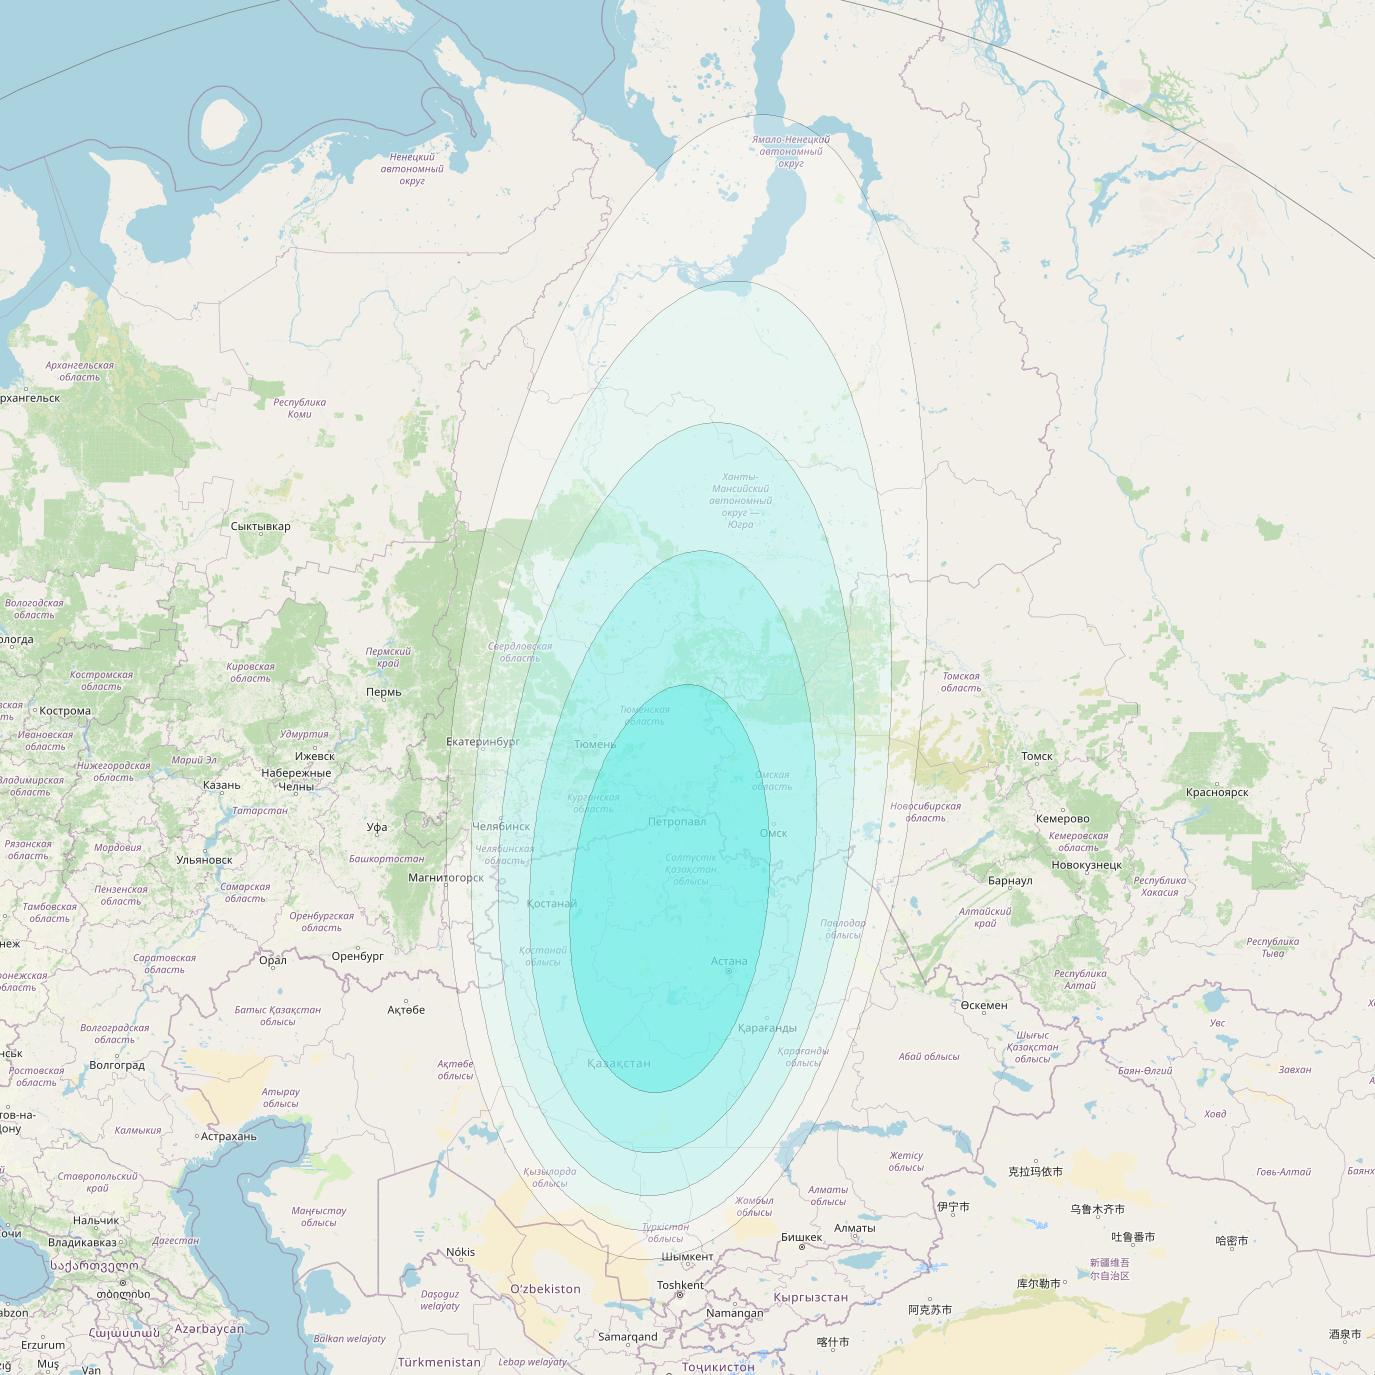 Inmarsat-4F2 at 64° E downlink L-band S110 User Spot beam coverage map